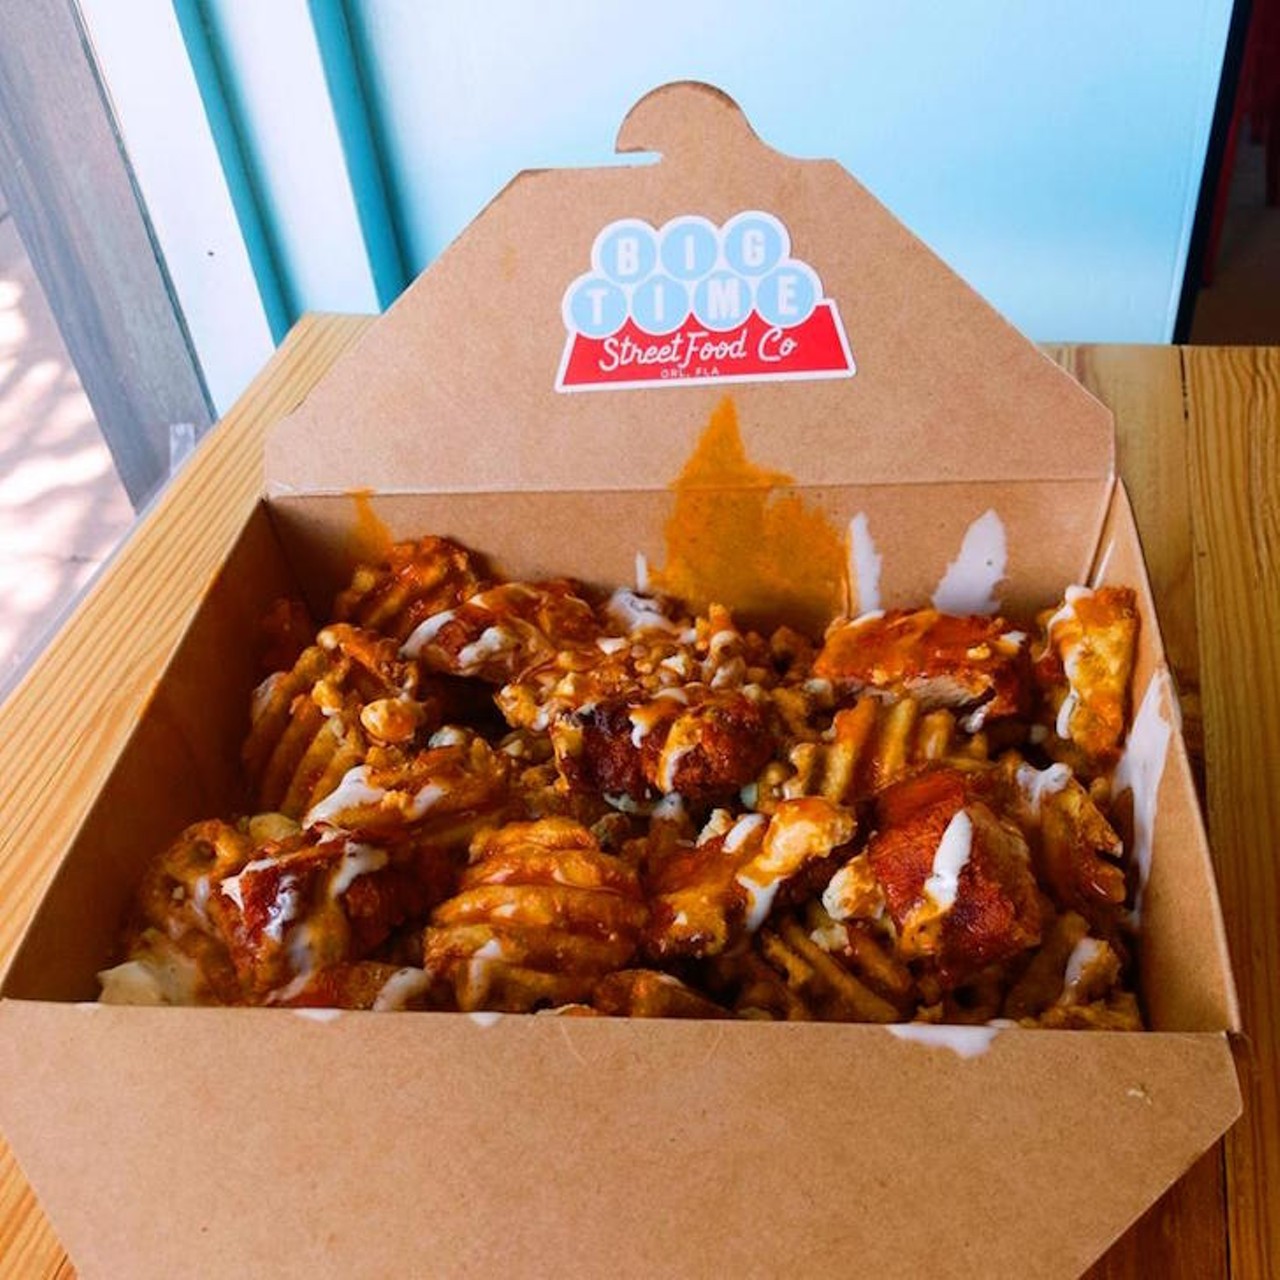 Big Time Street Food Co.: Buffalo Bird Fries  
805 E. Washington St., 407-801-5464
This is a big box of seasoned waffle fries smothered in blue cheese, topped with chunks of fried chicken, and finished with buffalo sauce and ranch. Get down on it.
Photo via Facebook/Big Time Street Food Co.